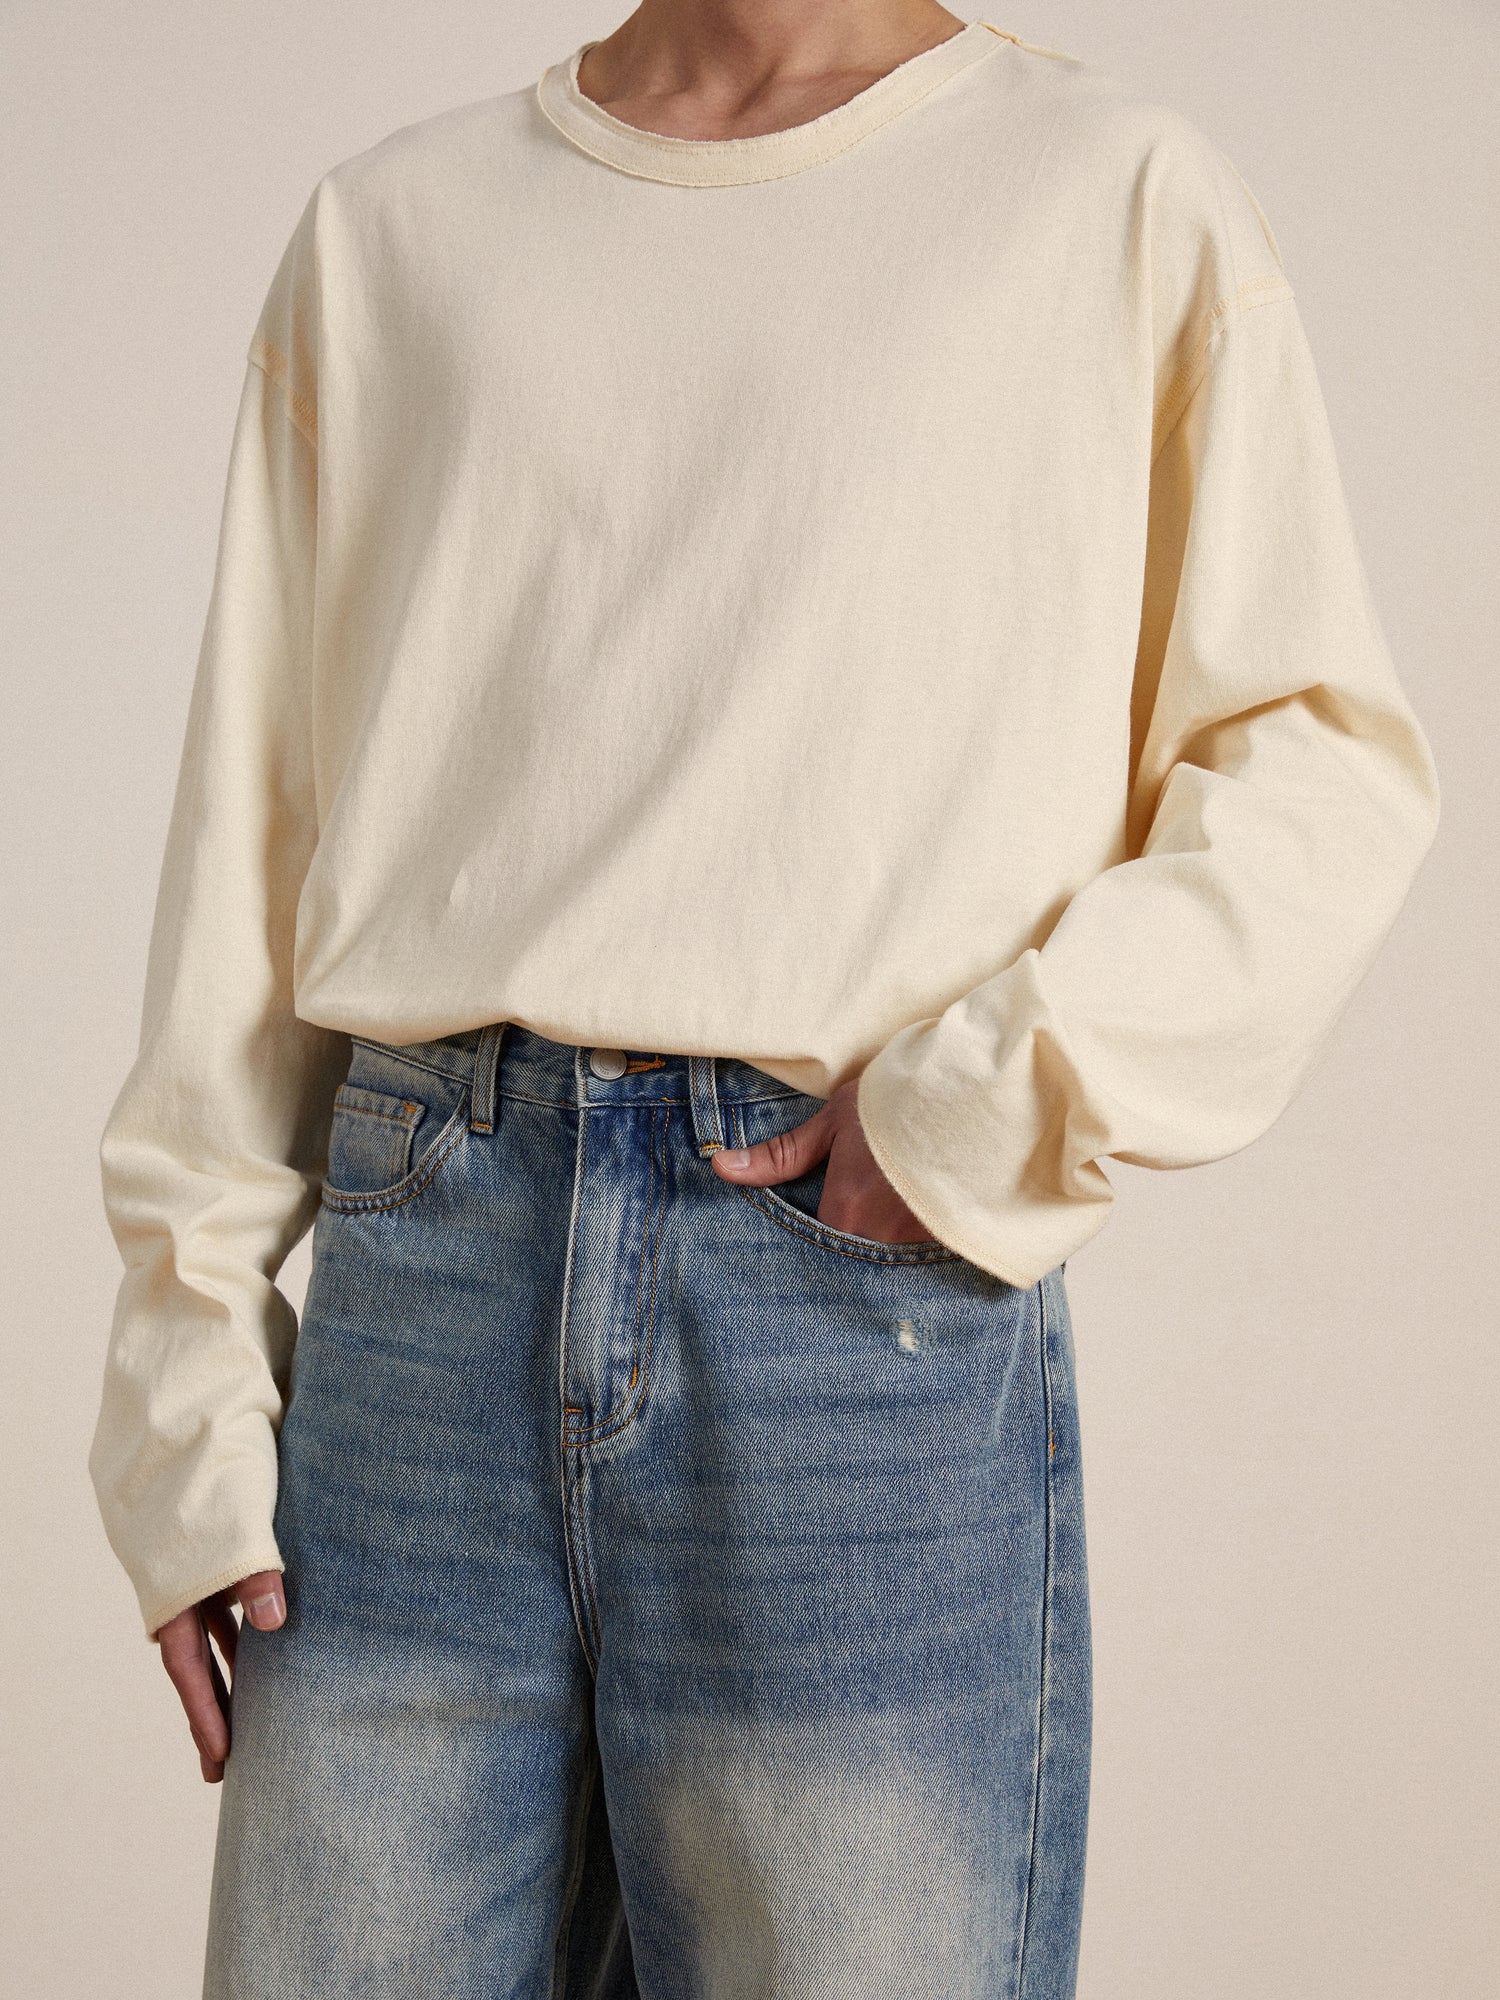 A man wearing jeans and a cream long-sleeved Reversed LS Tee made of premium materials with reversed seams from Profound.